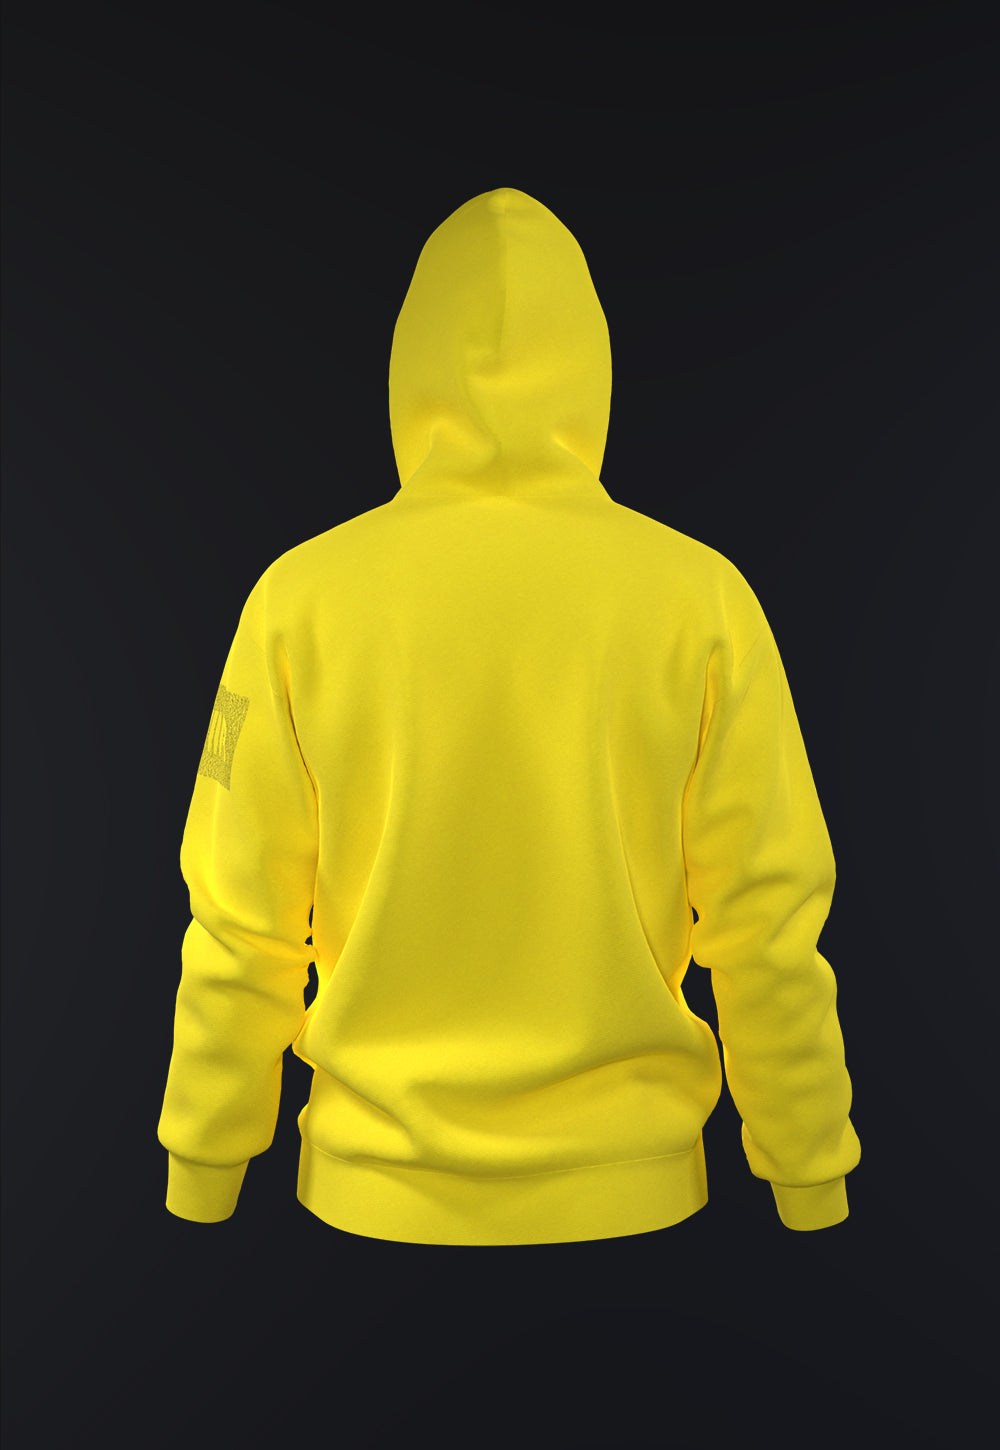 Velcro Hoodie and random patches (yellow)